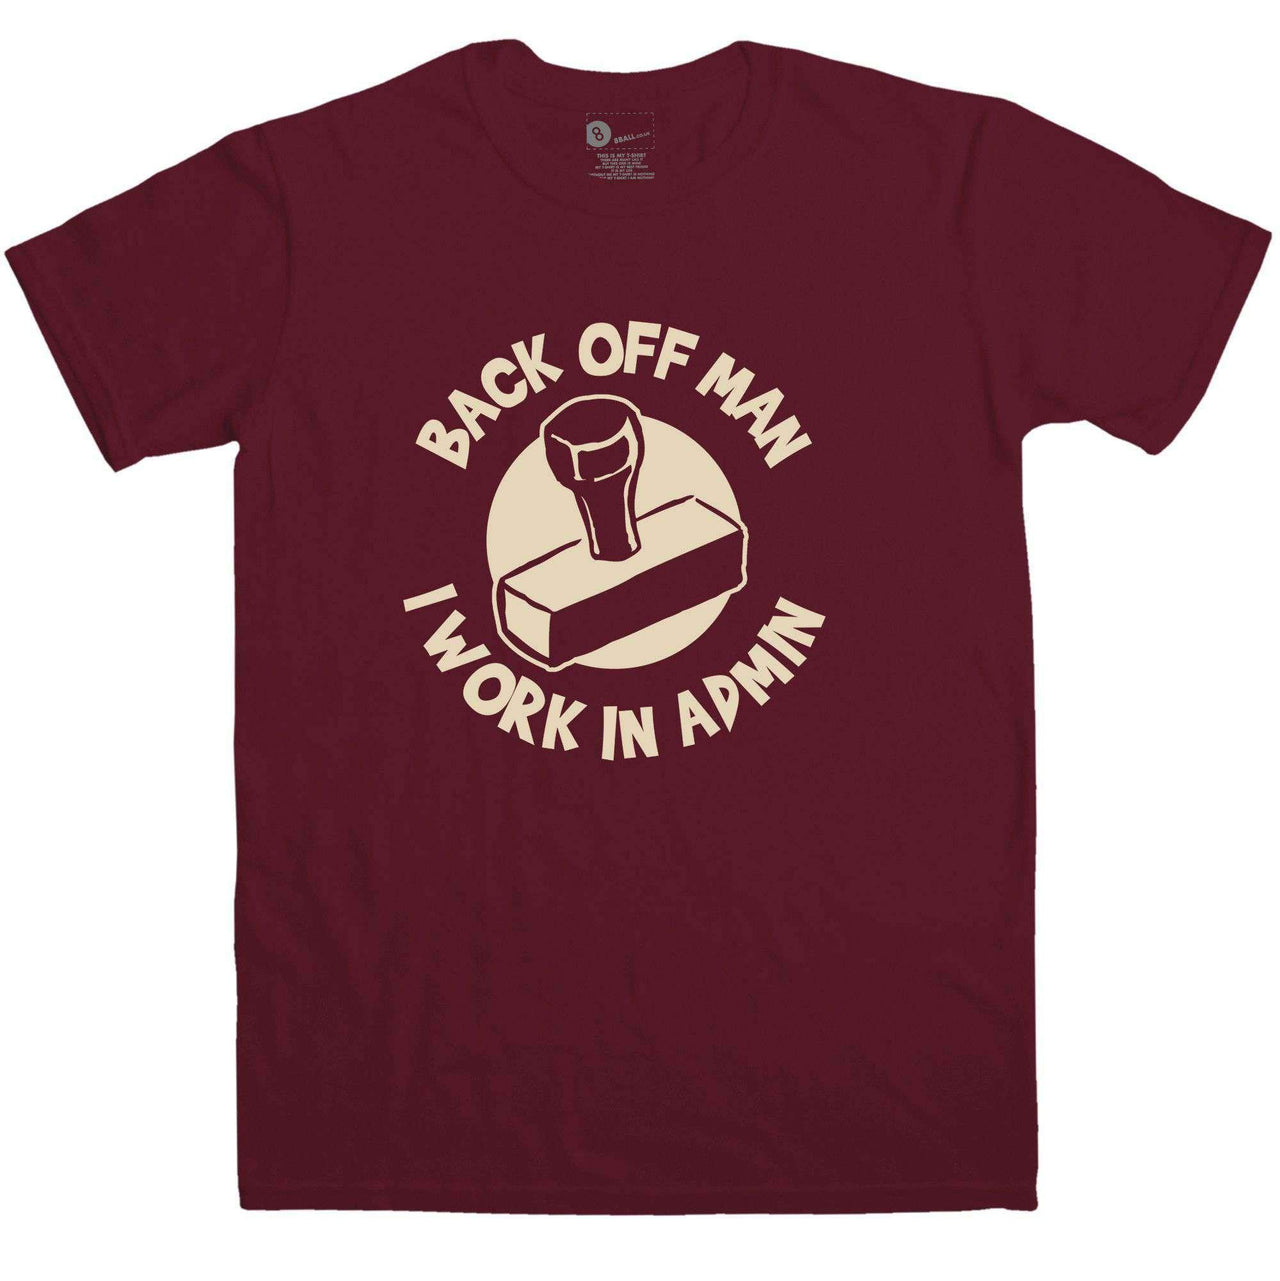 Back Off Man I Work In Admin Funny Graphic T-Shirt For Men 8Ball